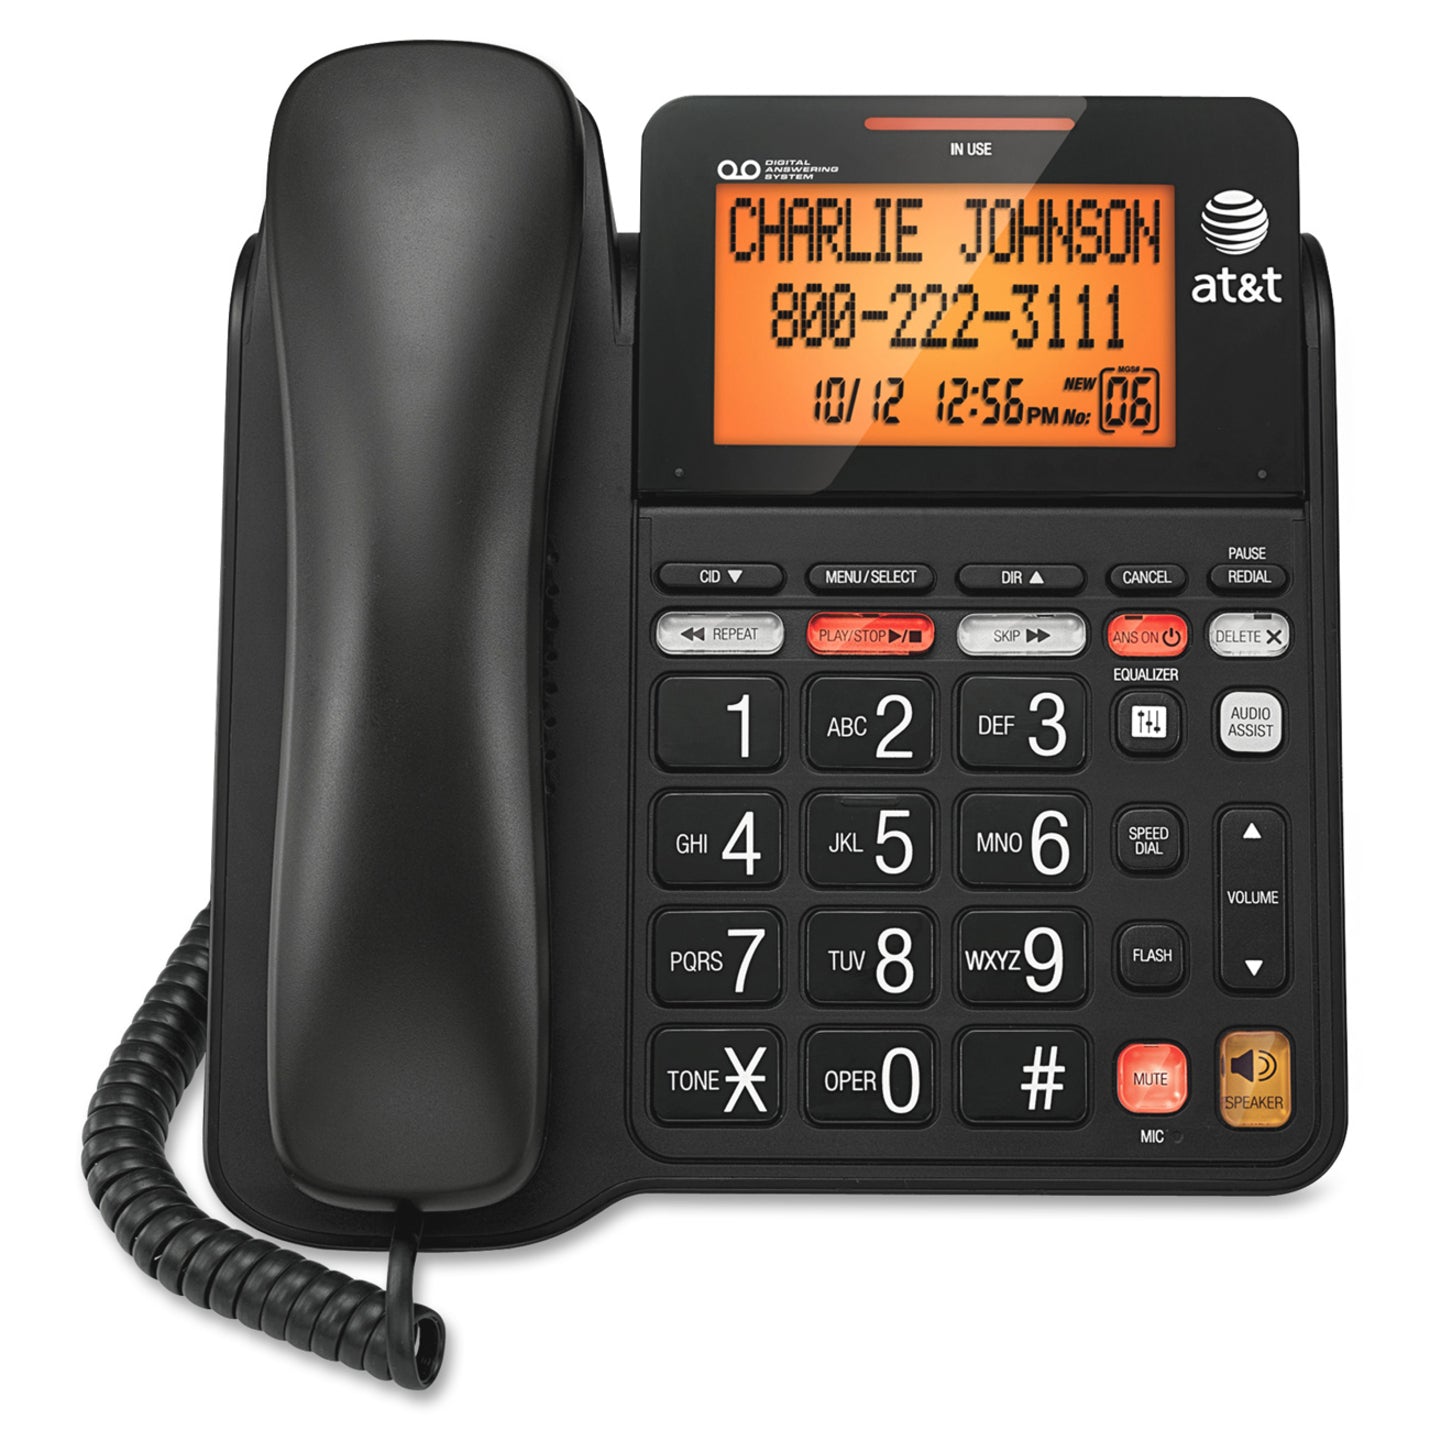 AT&T CL4940 Corded Answering System with Backlit Display, Caller ID Memory, Speed Dial Memory, Phone Book/Directory Memory